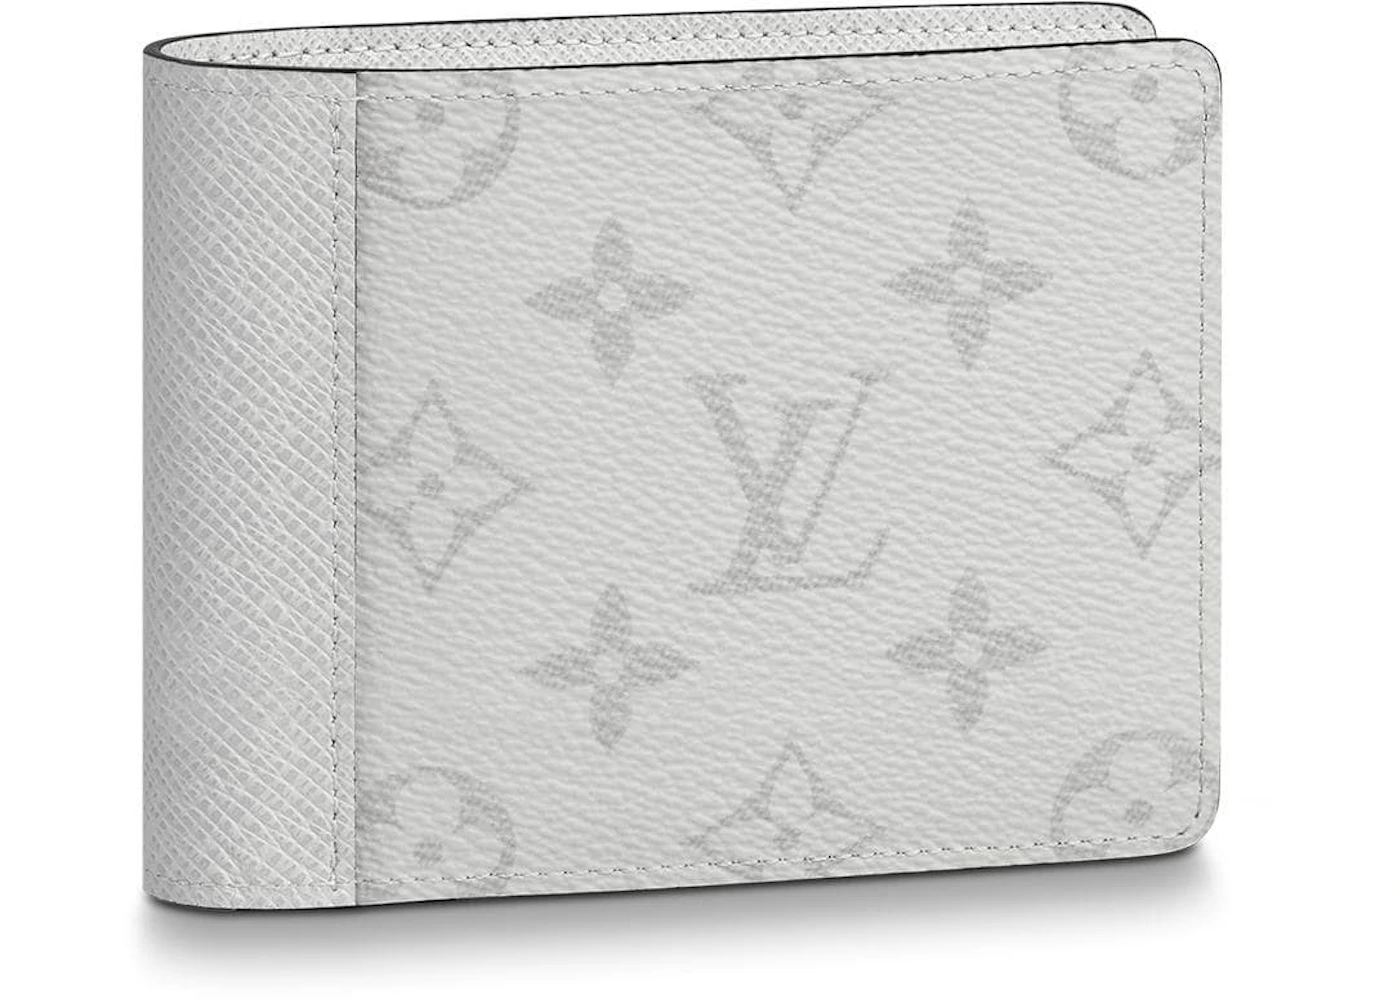 white leather louis vuittons wallet